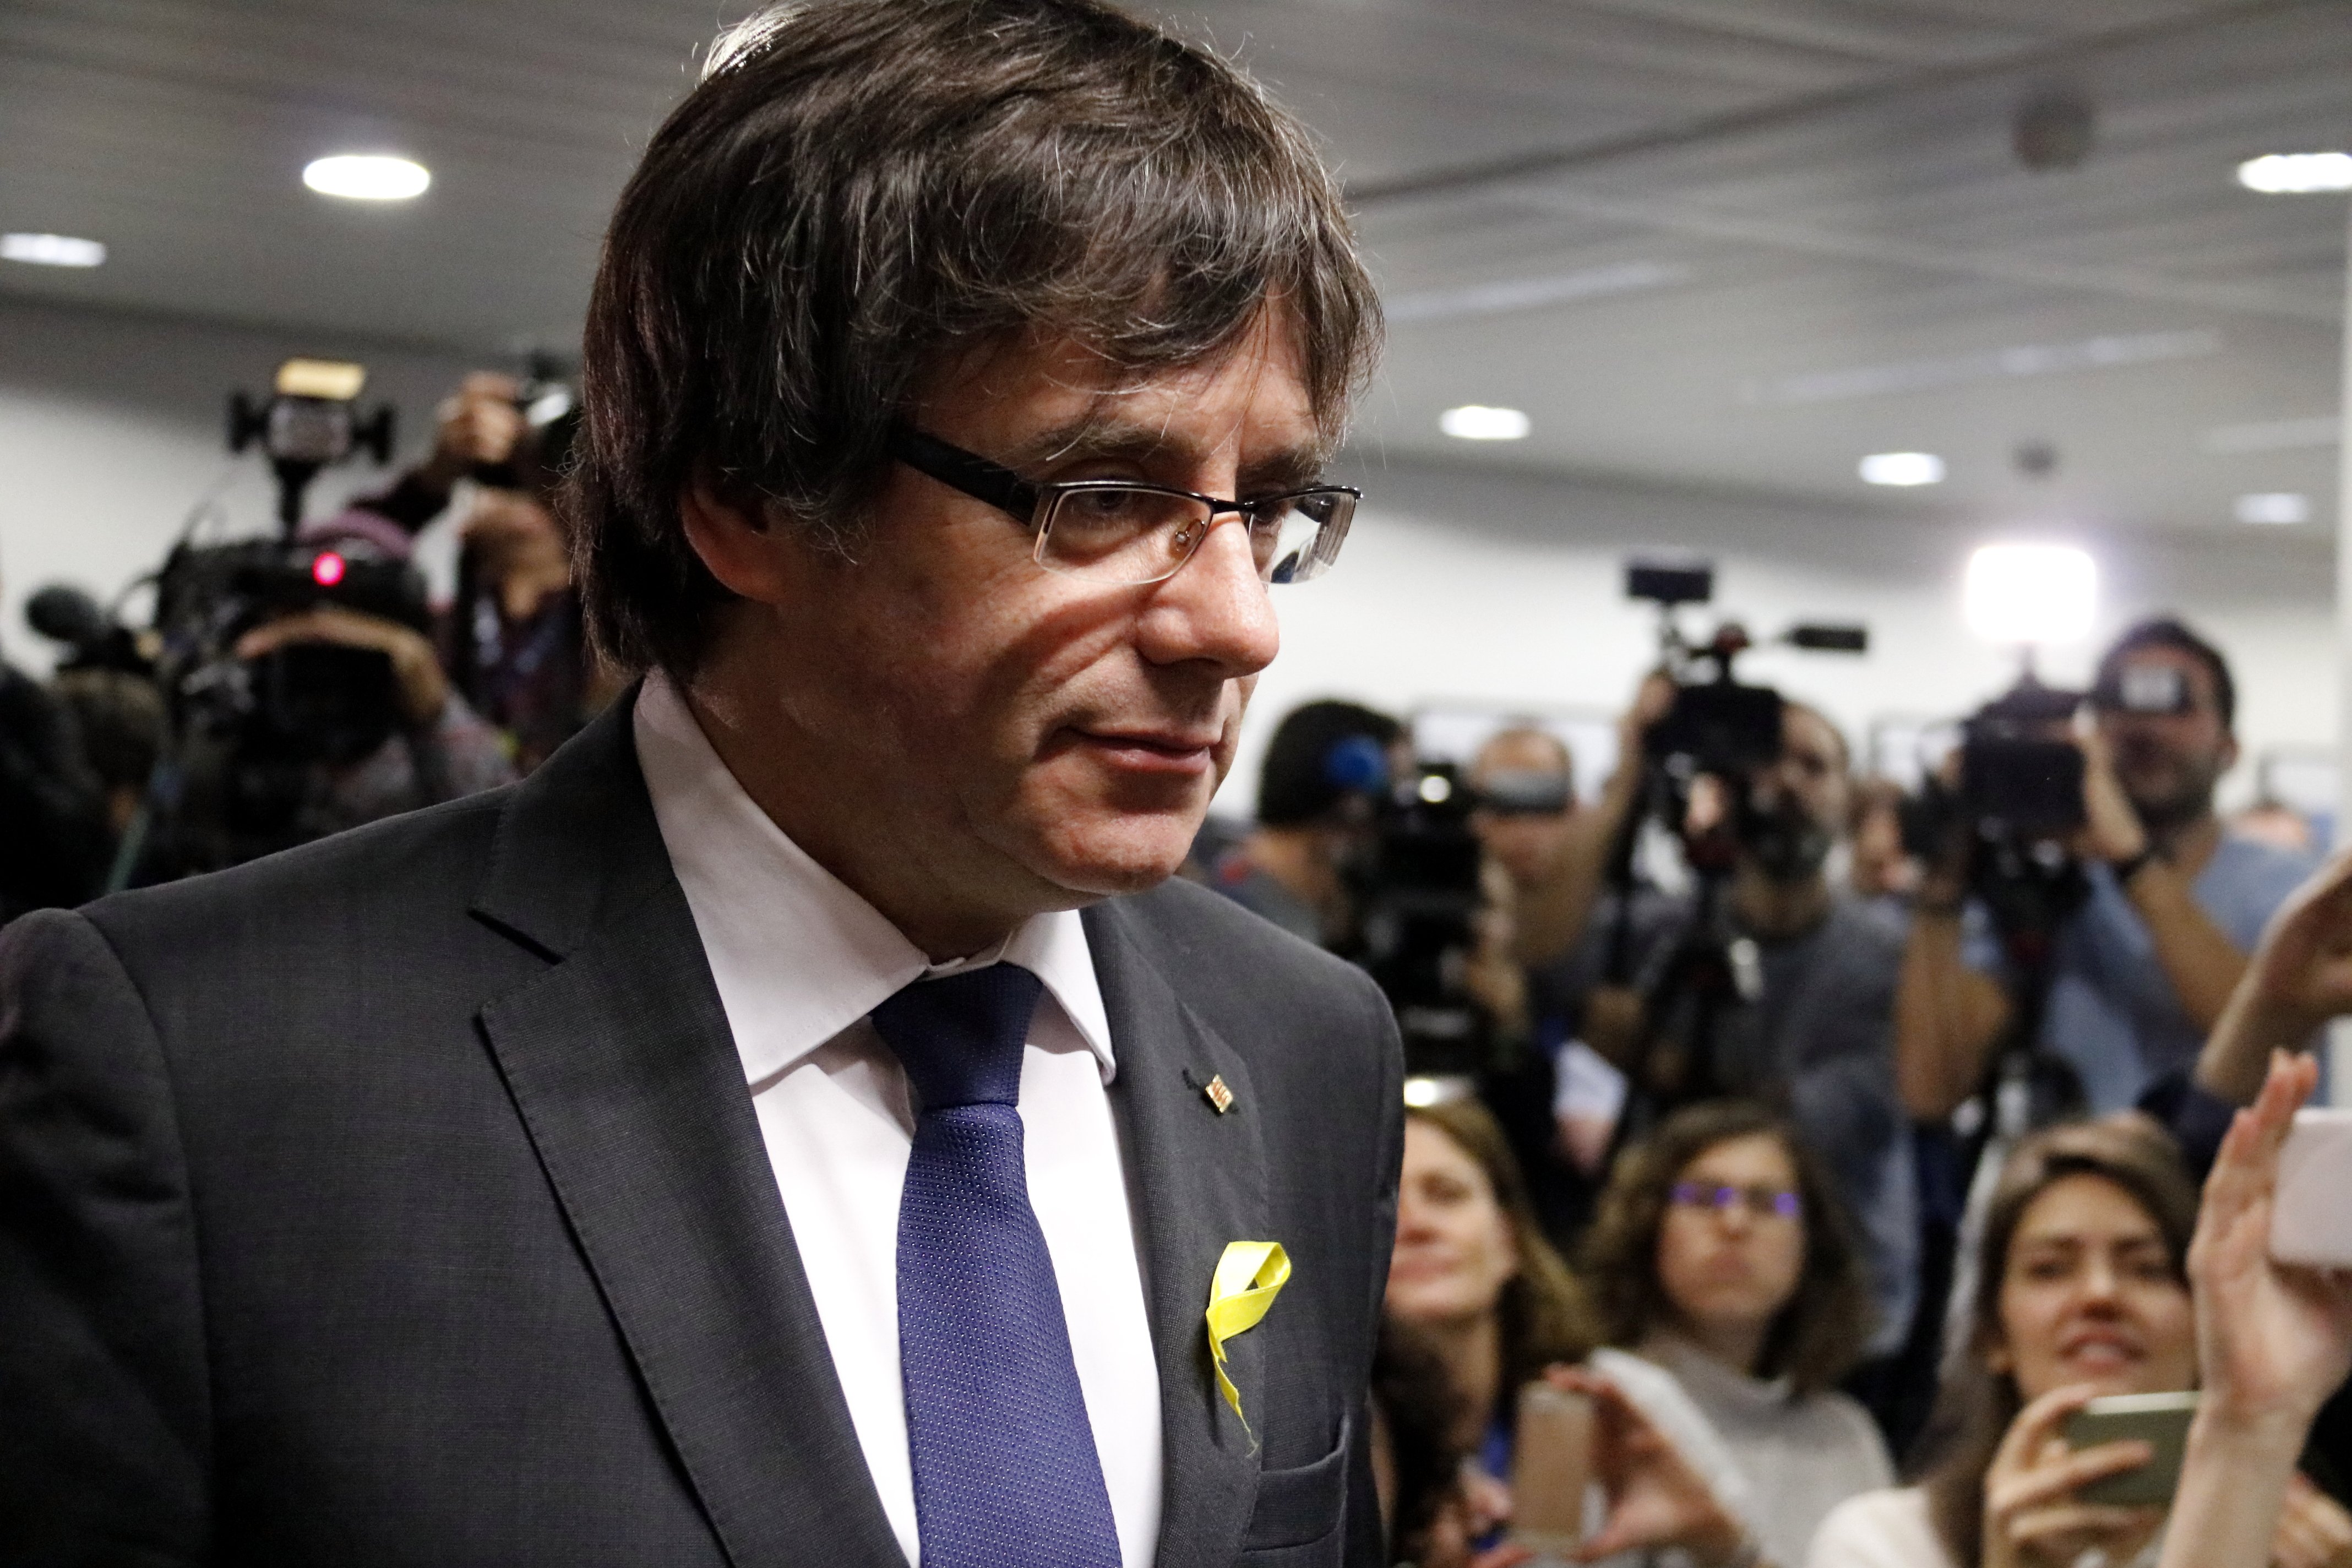 Puigdemont swears to uphold the Constitution due to "legal imperative"